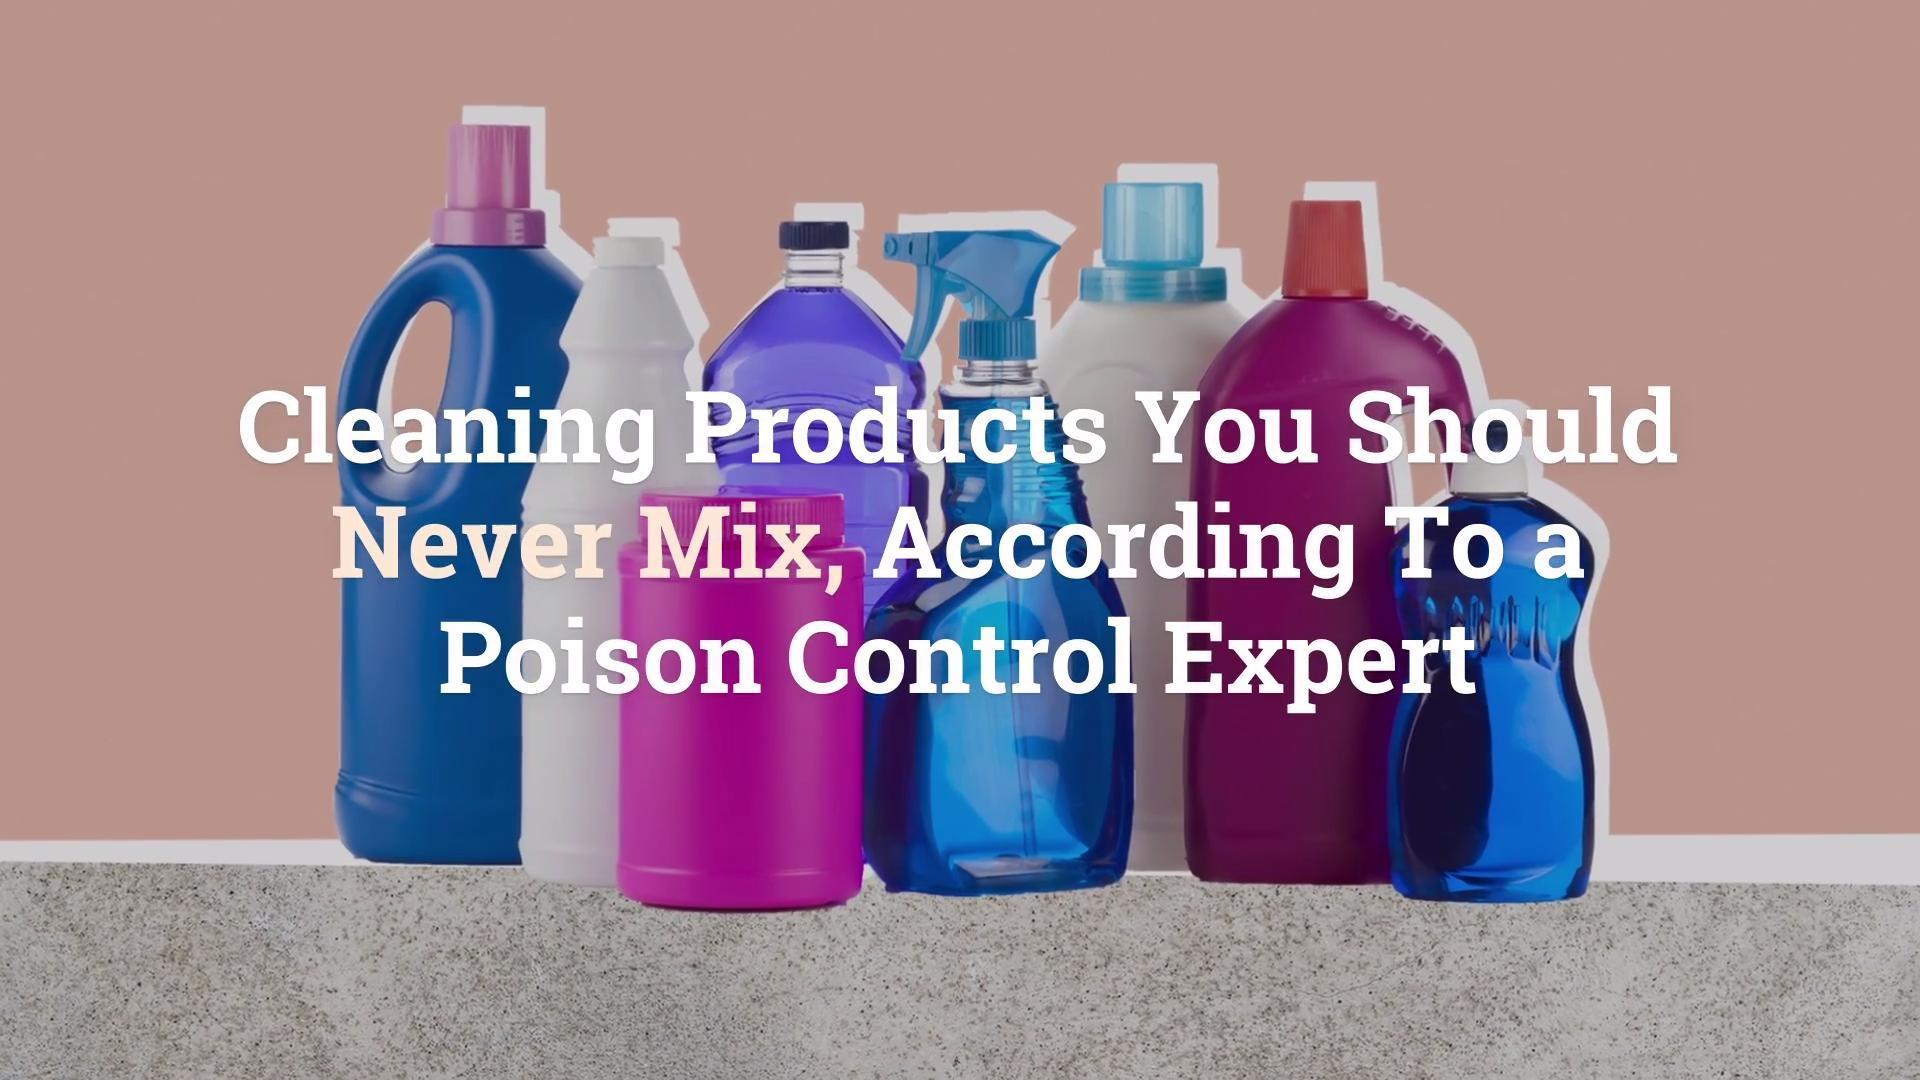 Basic Household Cleaning Products You Should Never Mix